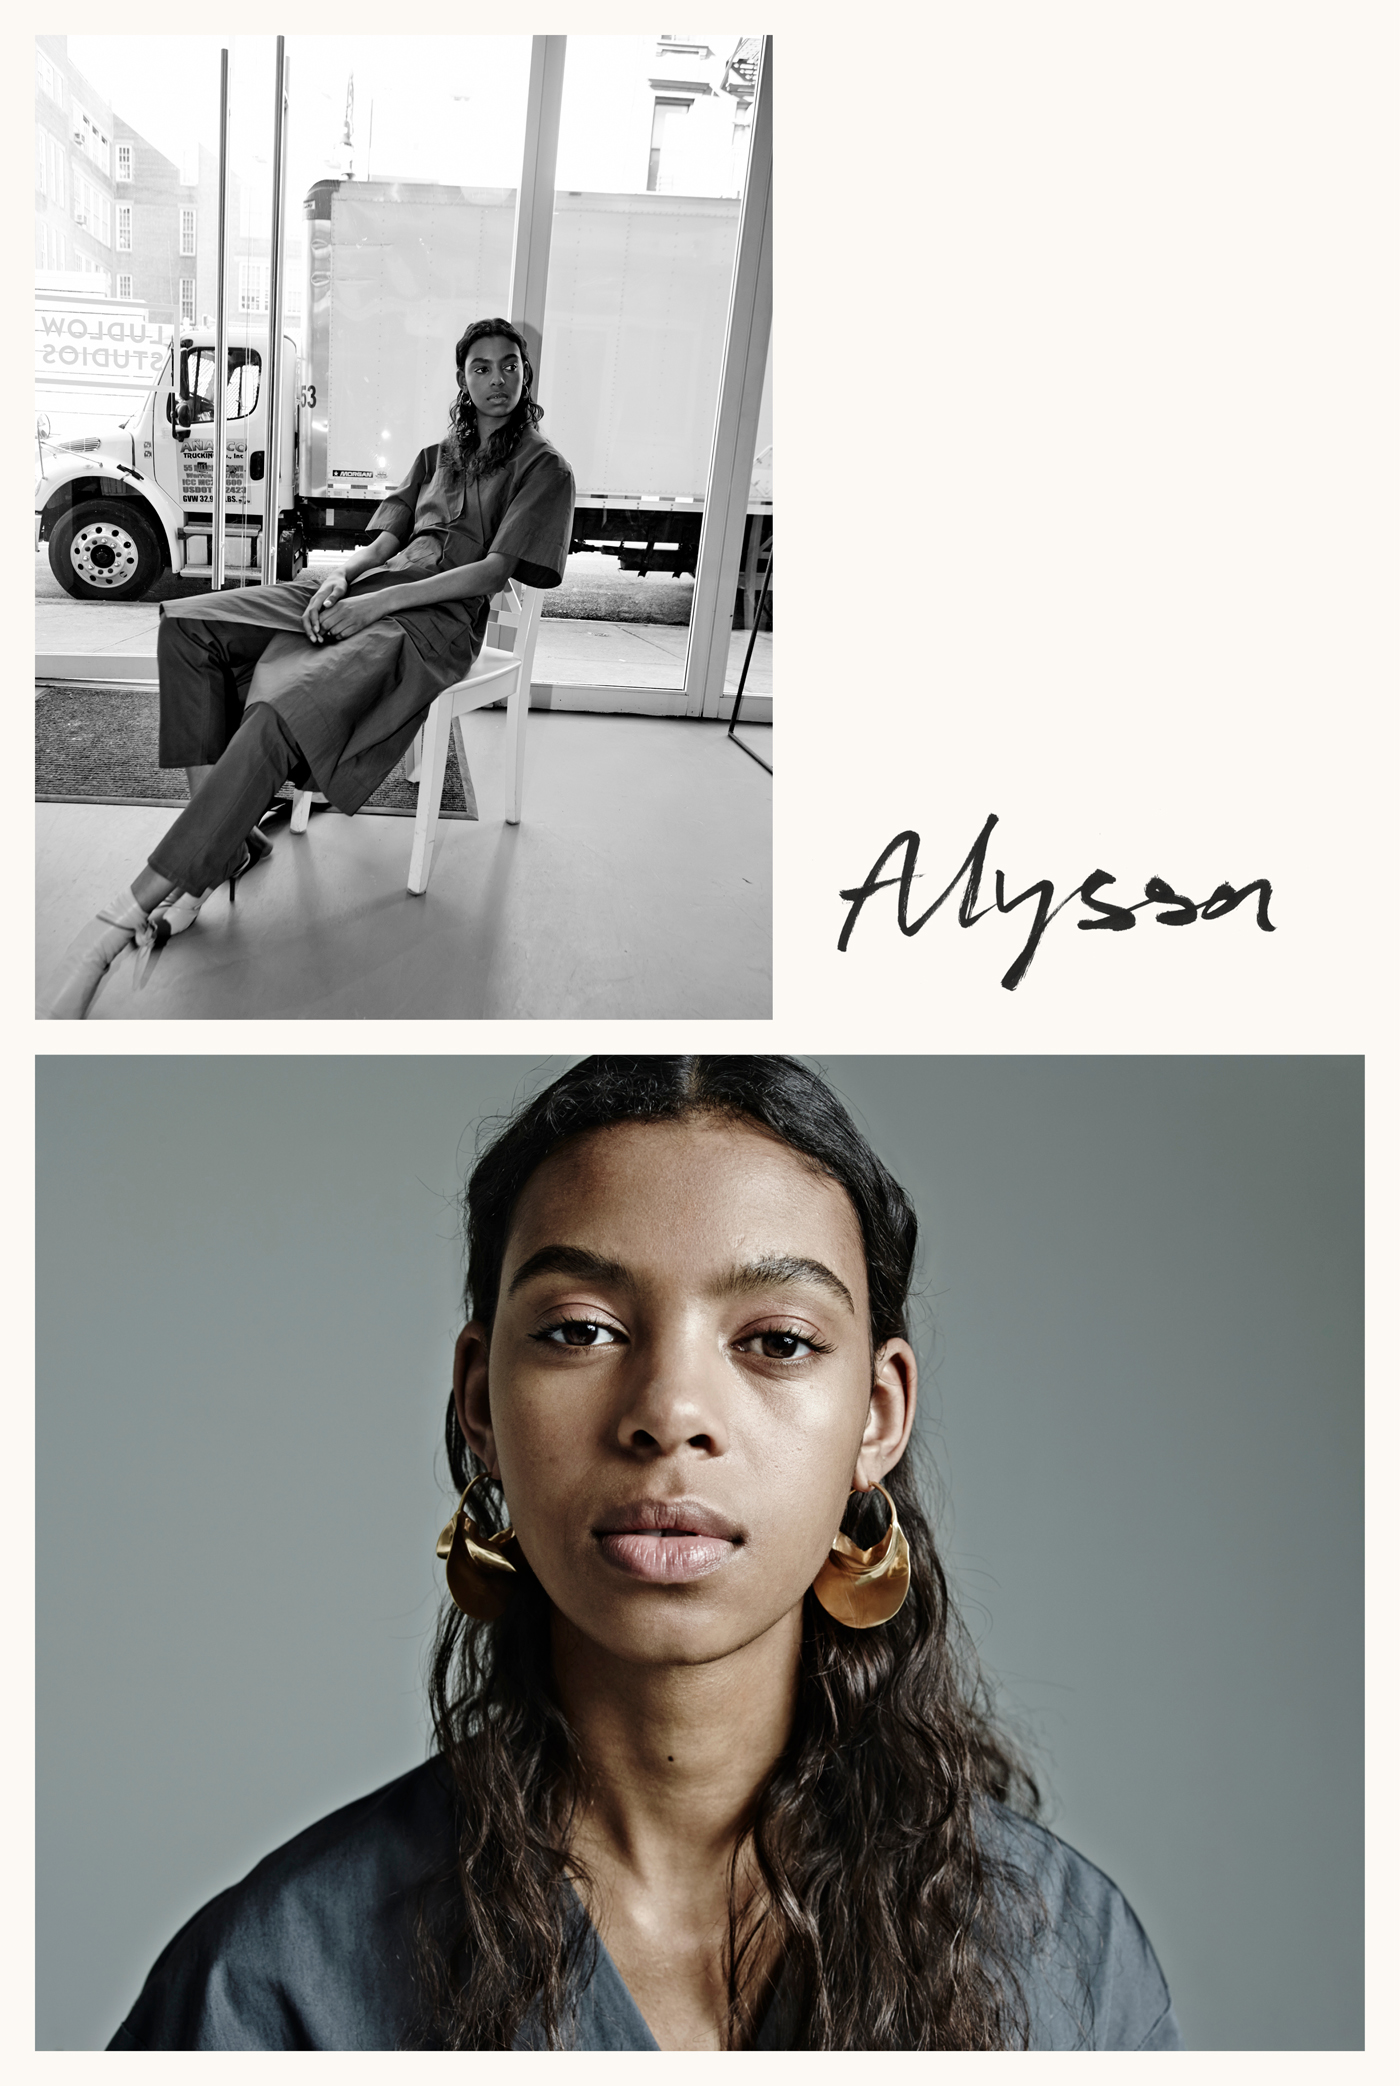 Alyssa Traoré at IMG Models wears all clothing and accessories by Céline.